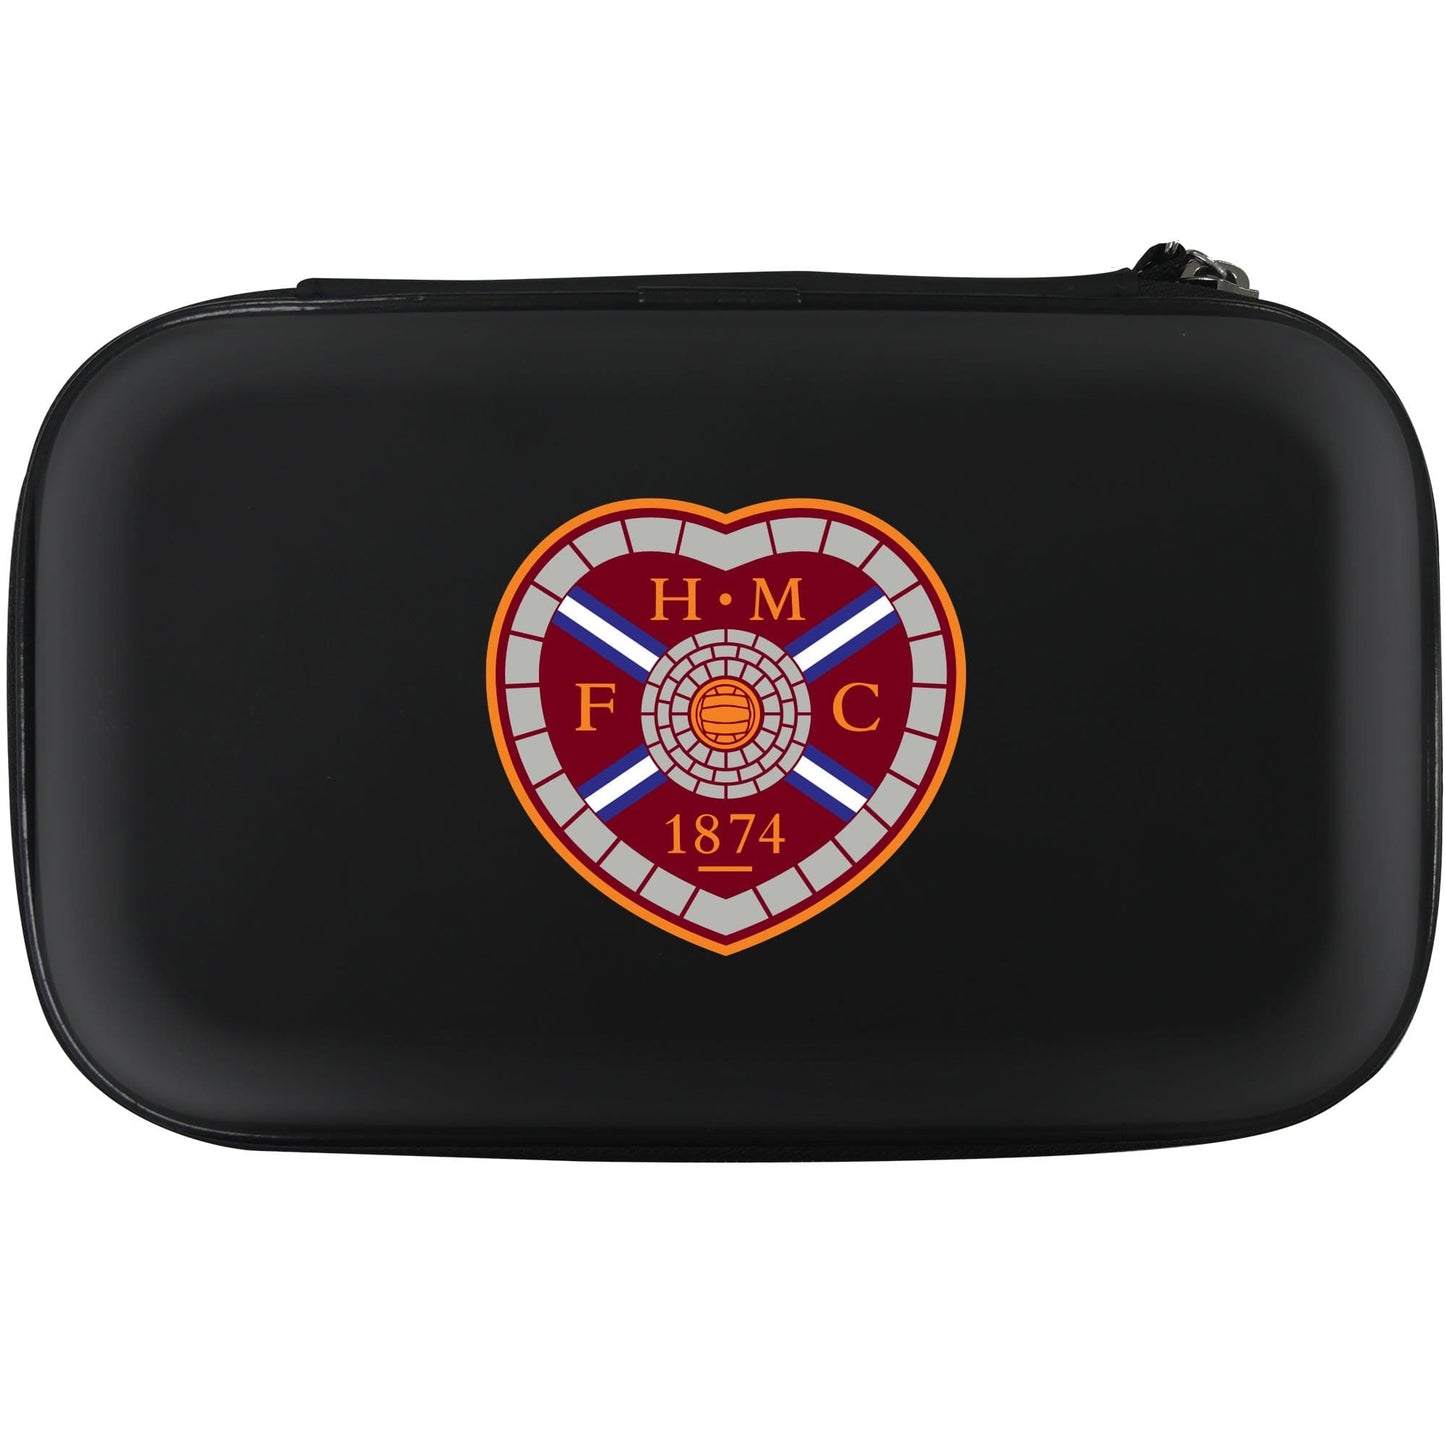 Heart of Midlothian FC - Official Licensed - Hearts - Dart Case - W1 - Crest